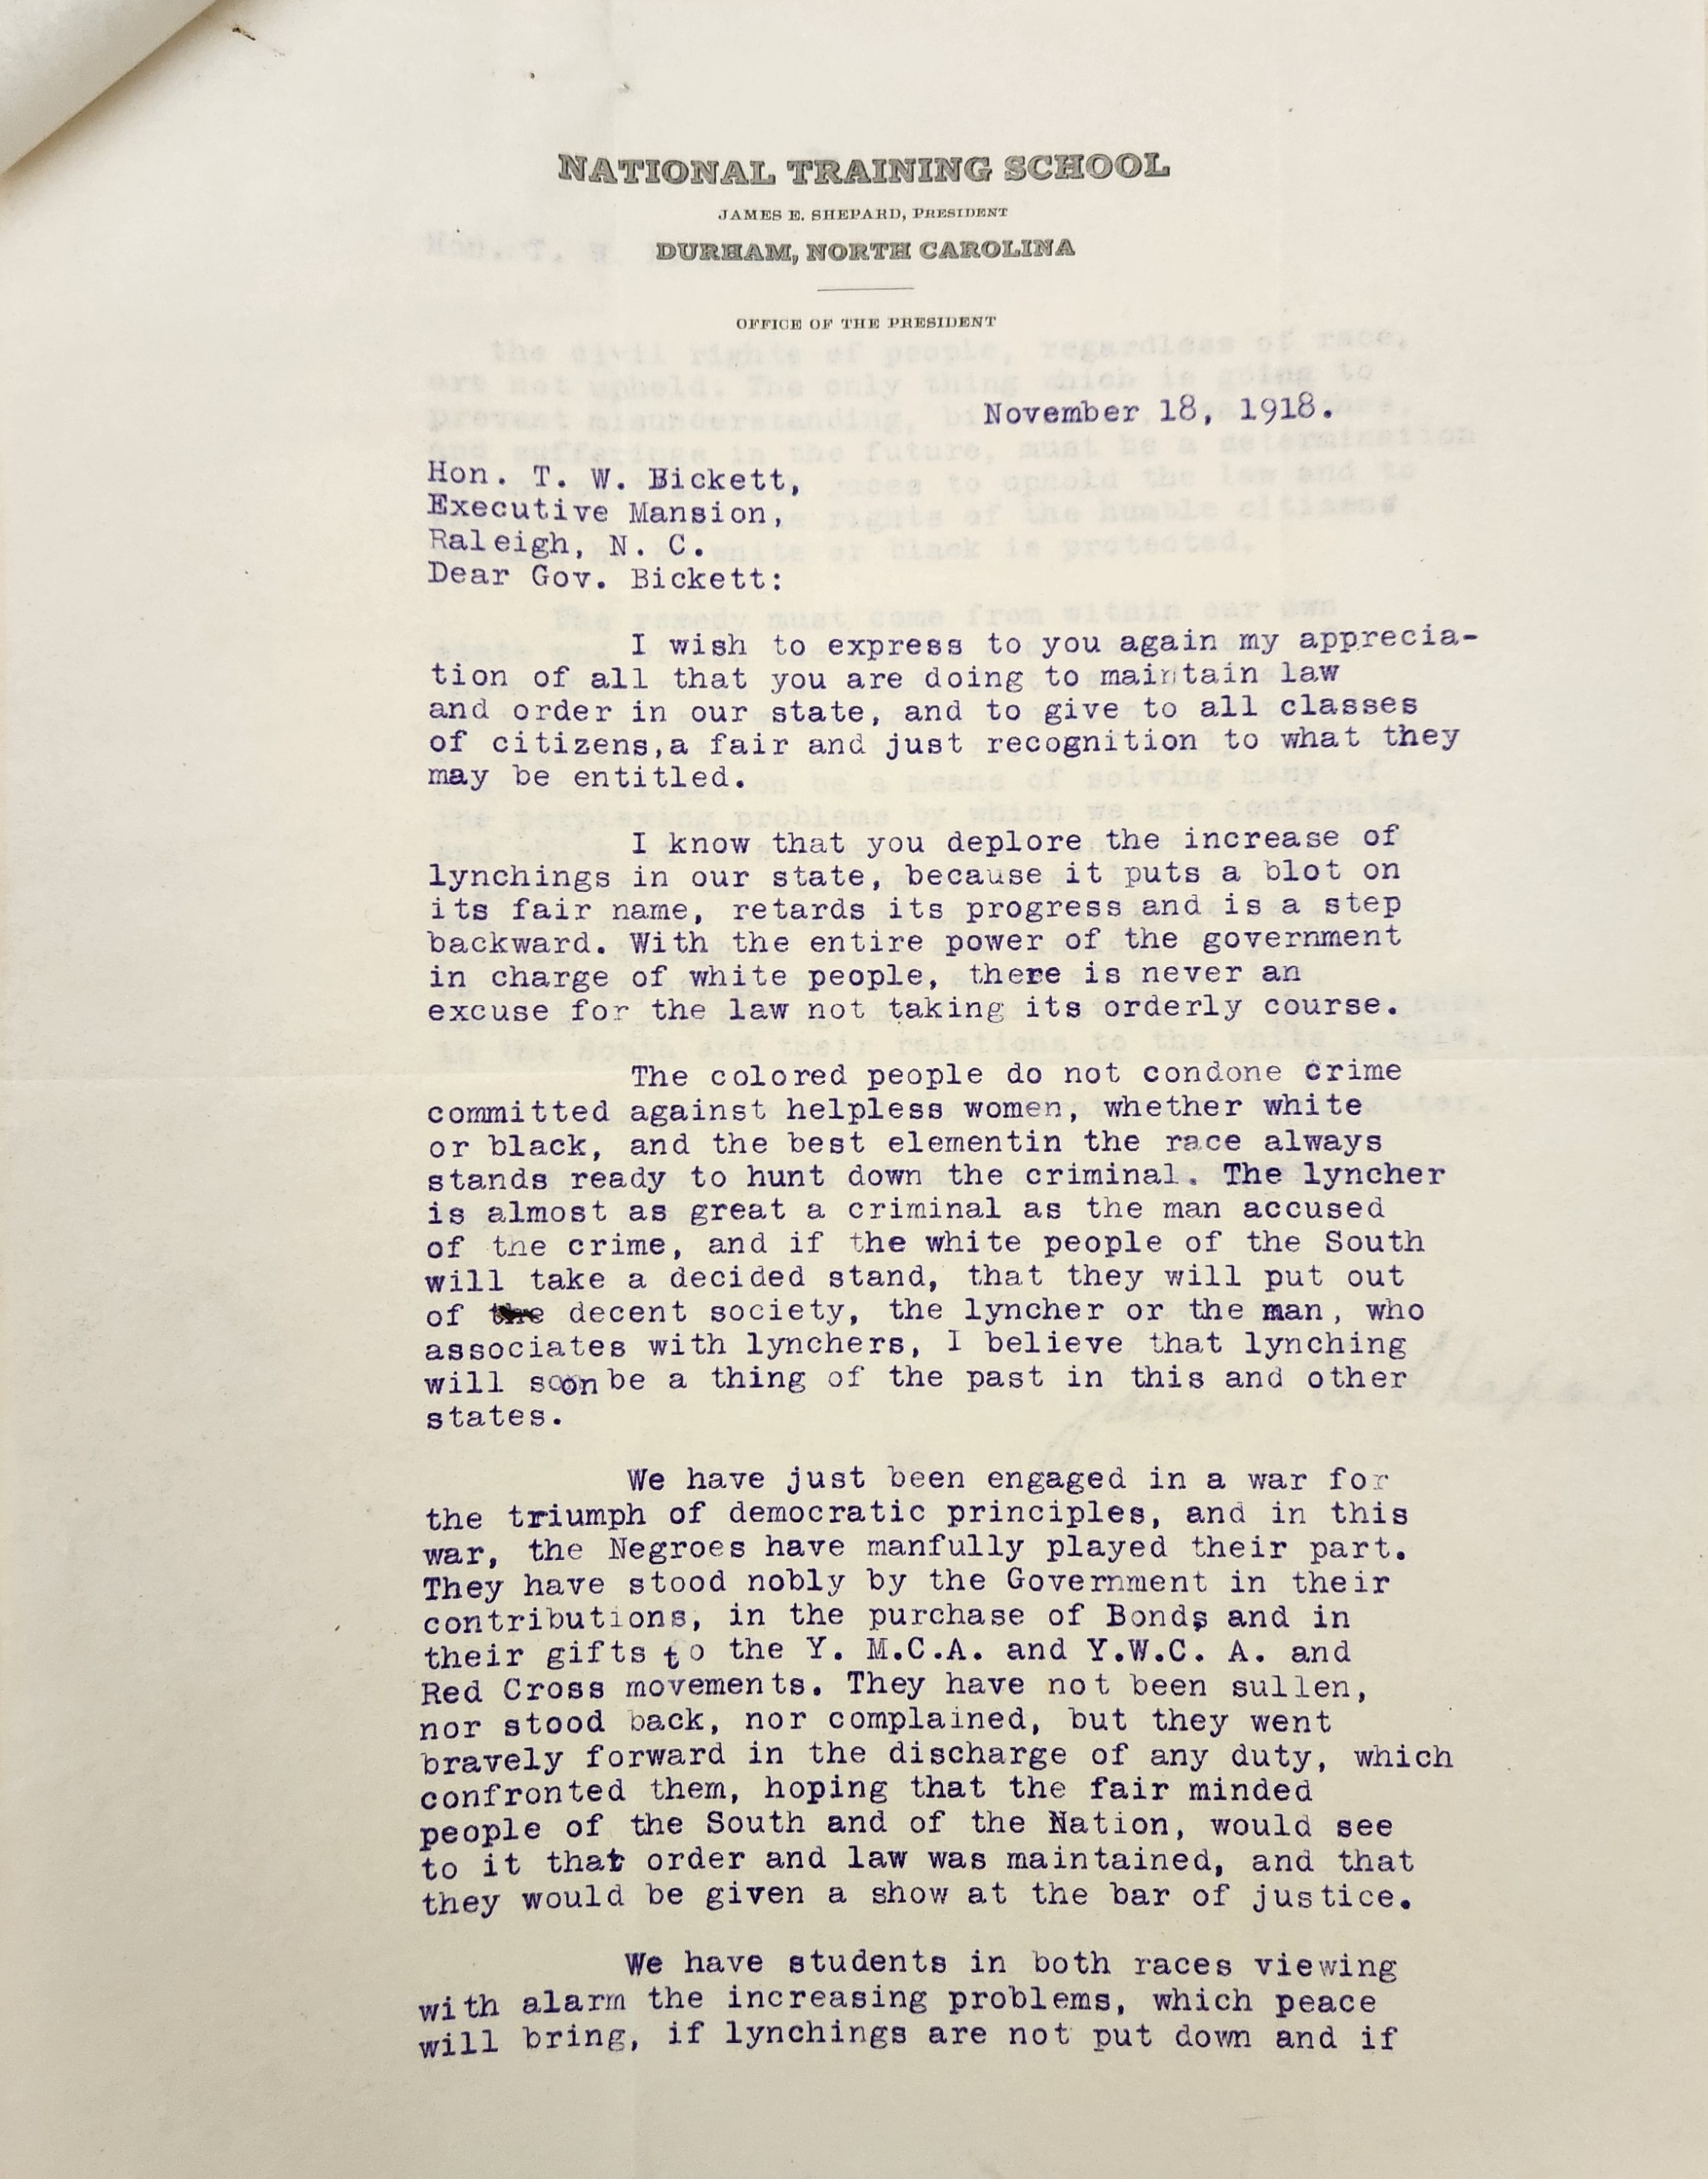 Letter from Shepard to Bickett, November 18, 1918, page 1